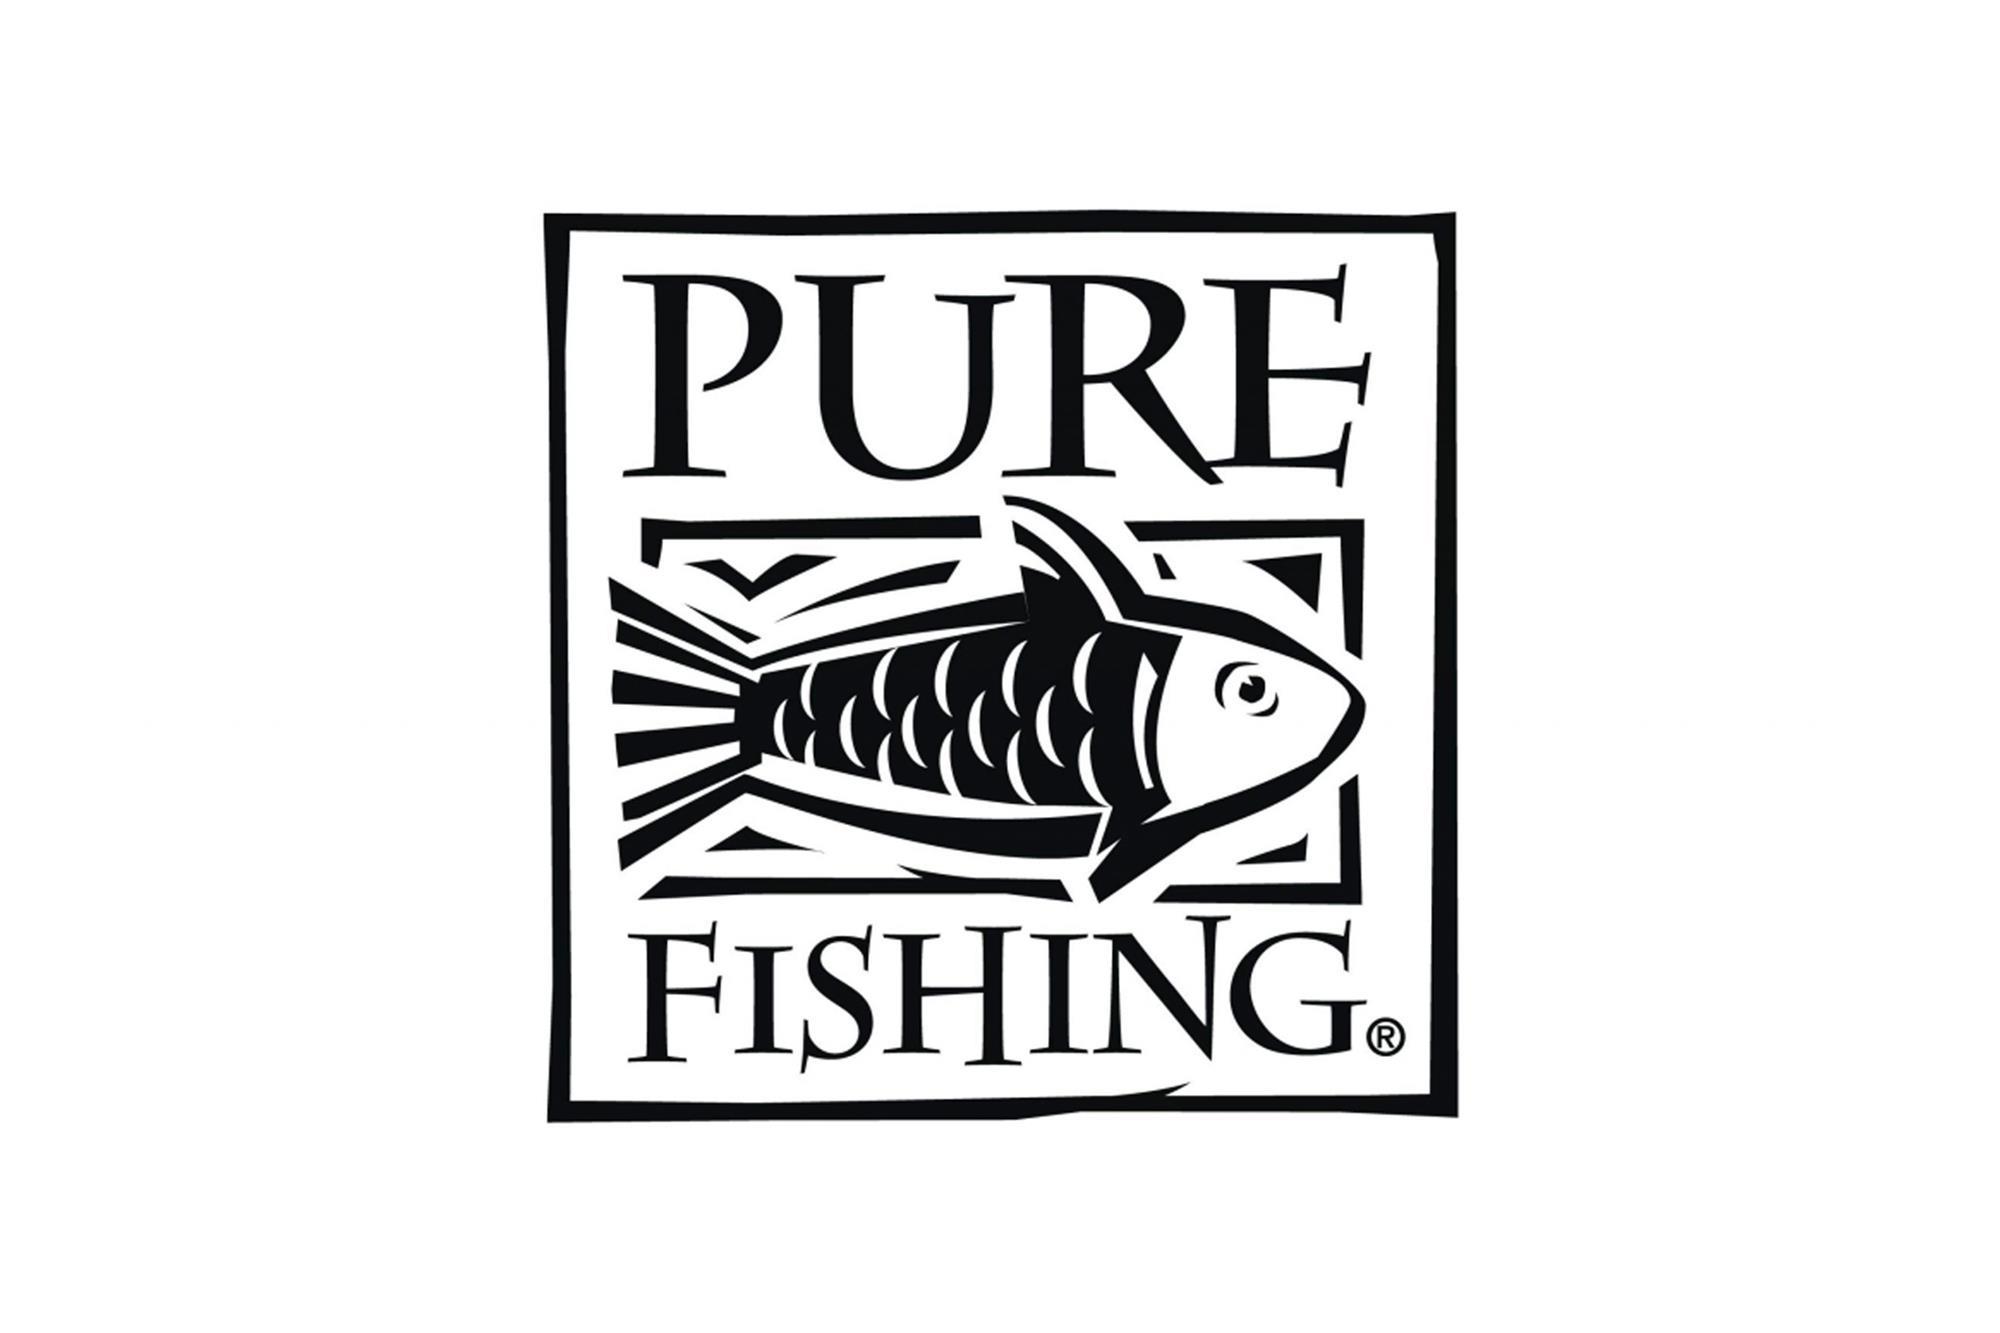 Pure Fishing appoints new CEO, News briefs